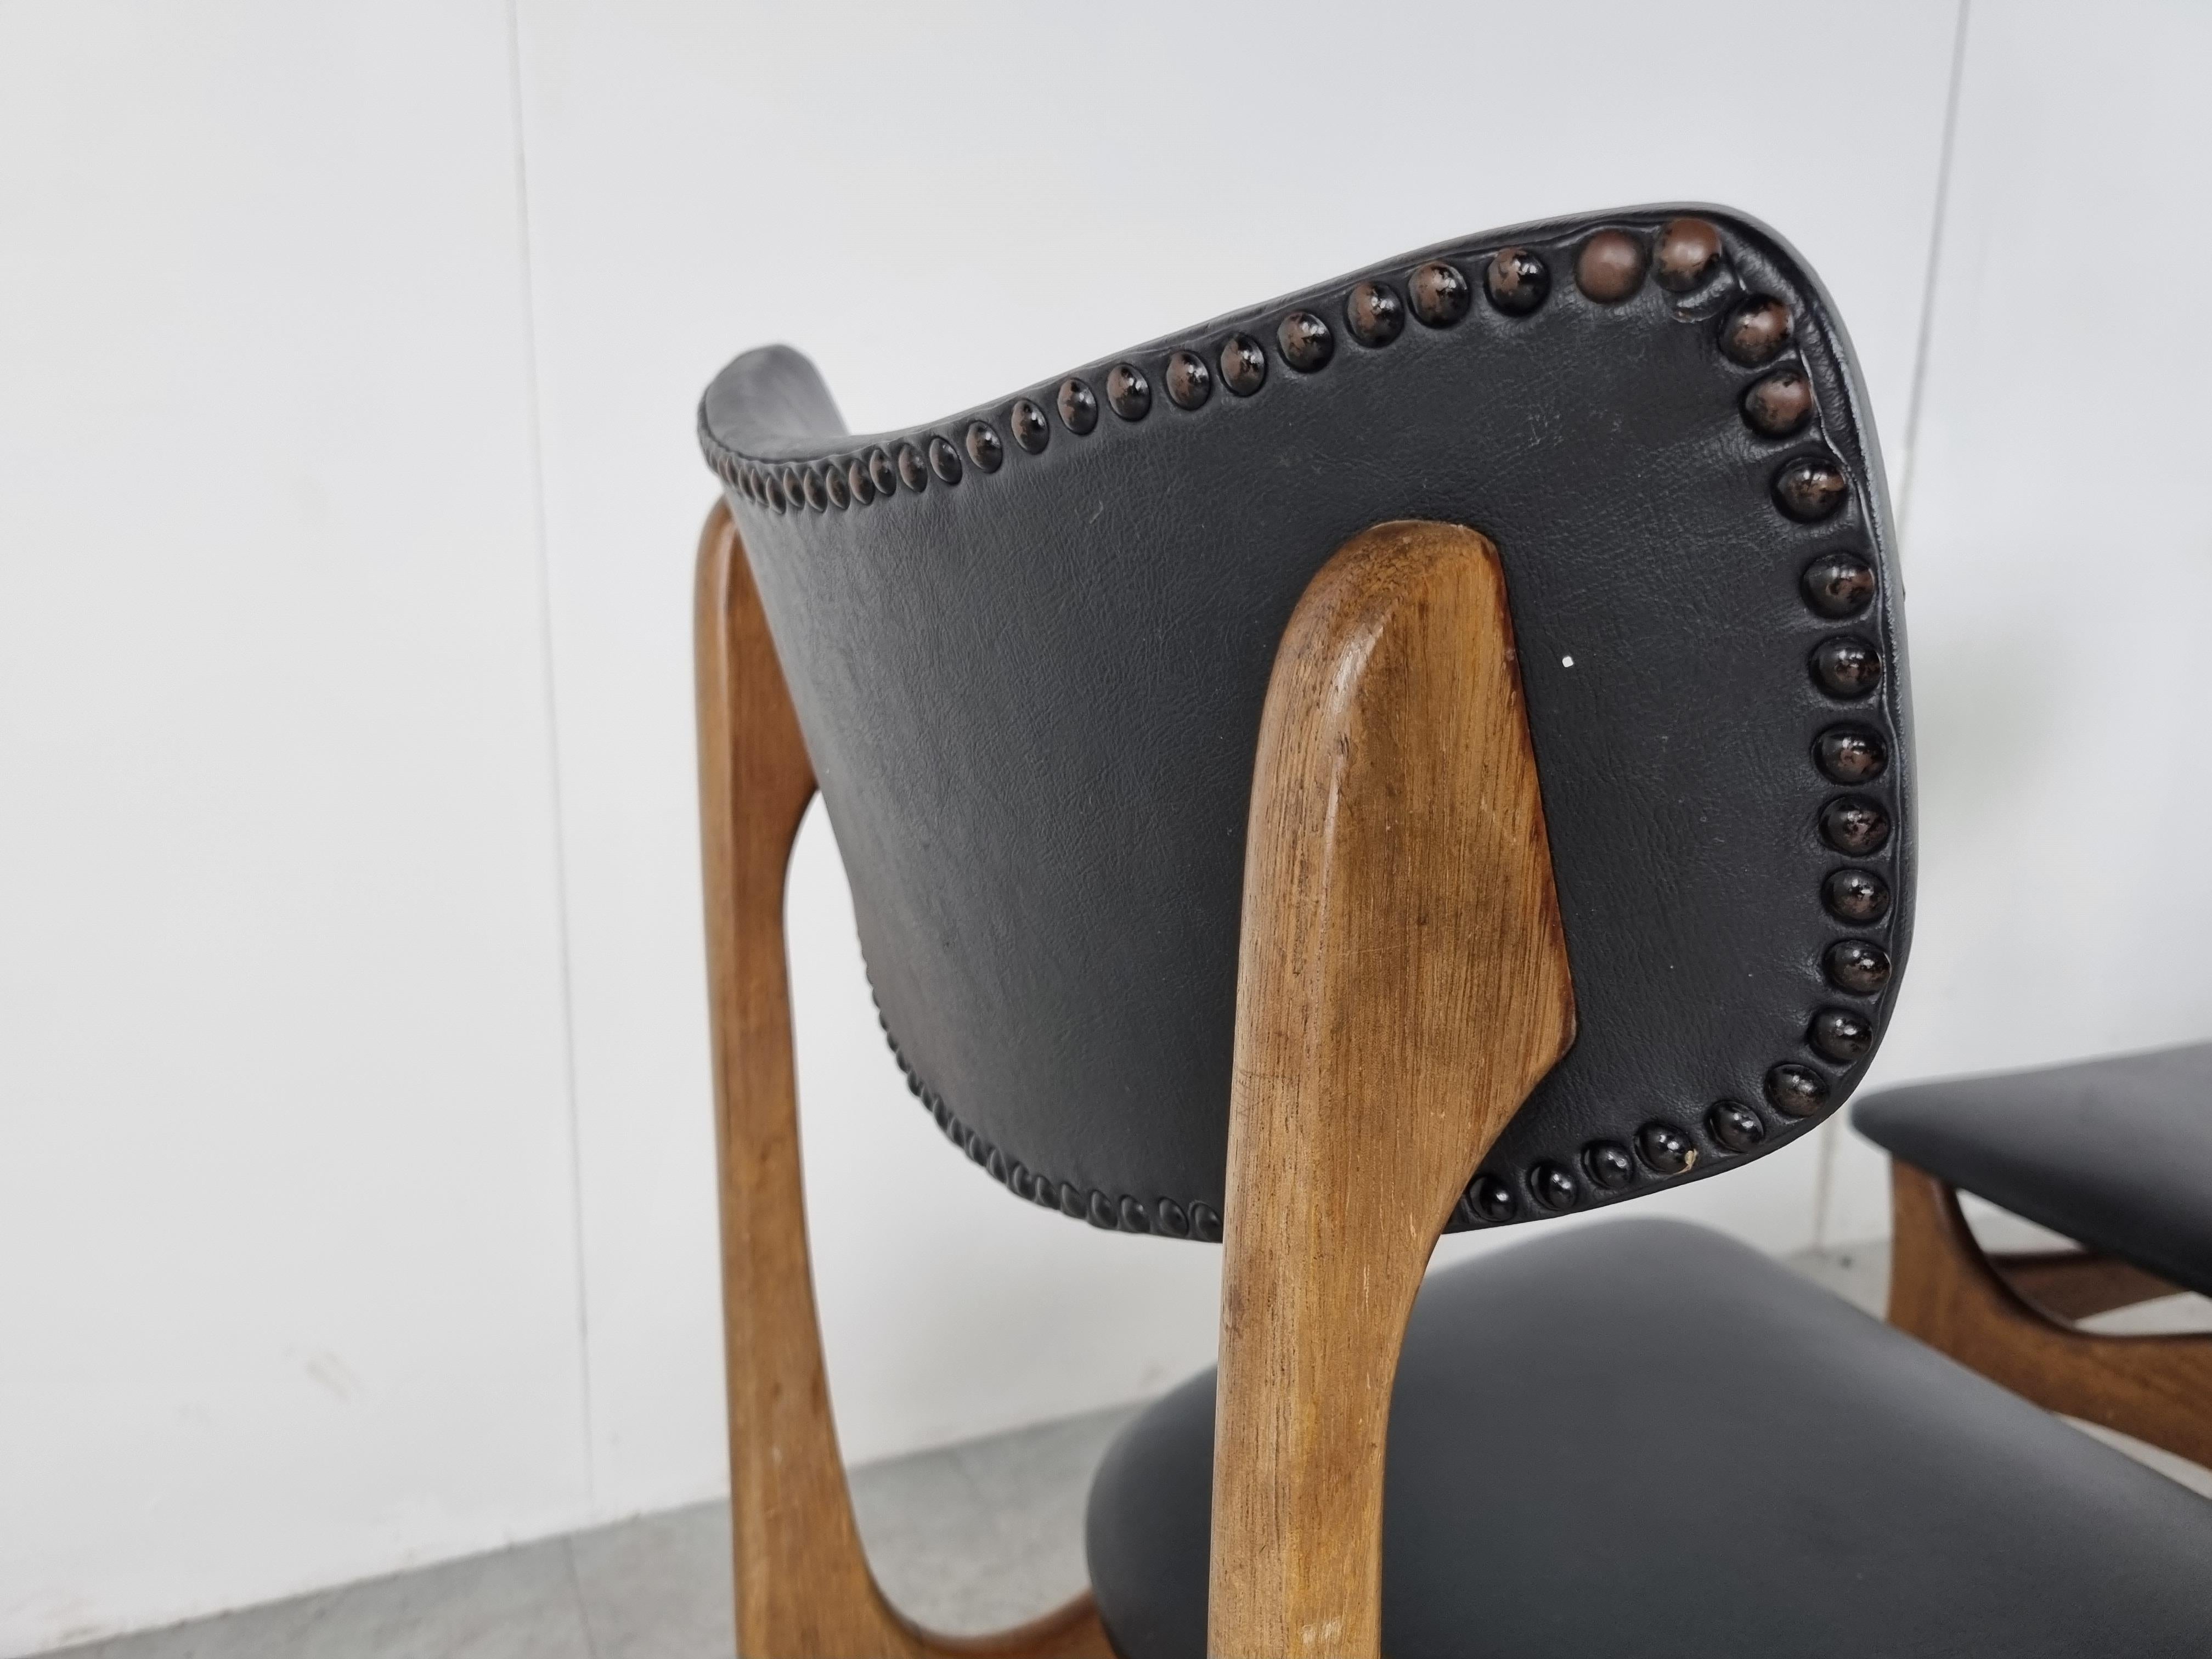 Mid-century dining chairs designed by Louis van Teeffelen.

Beautifully crafted curved teak frames with a black leatherette upholstery.

The chairs are in a good original condition.

1960s - Netherlands

Height: 86cm/33.85